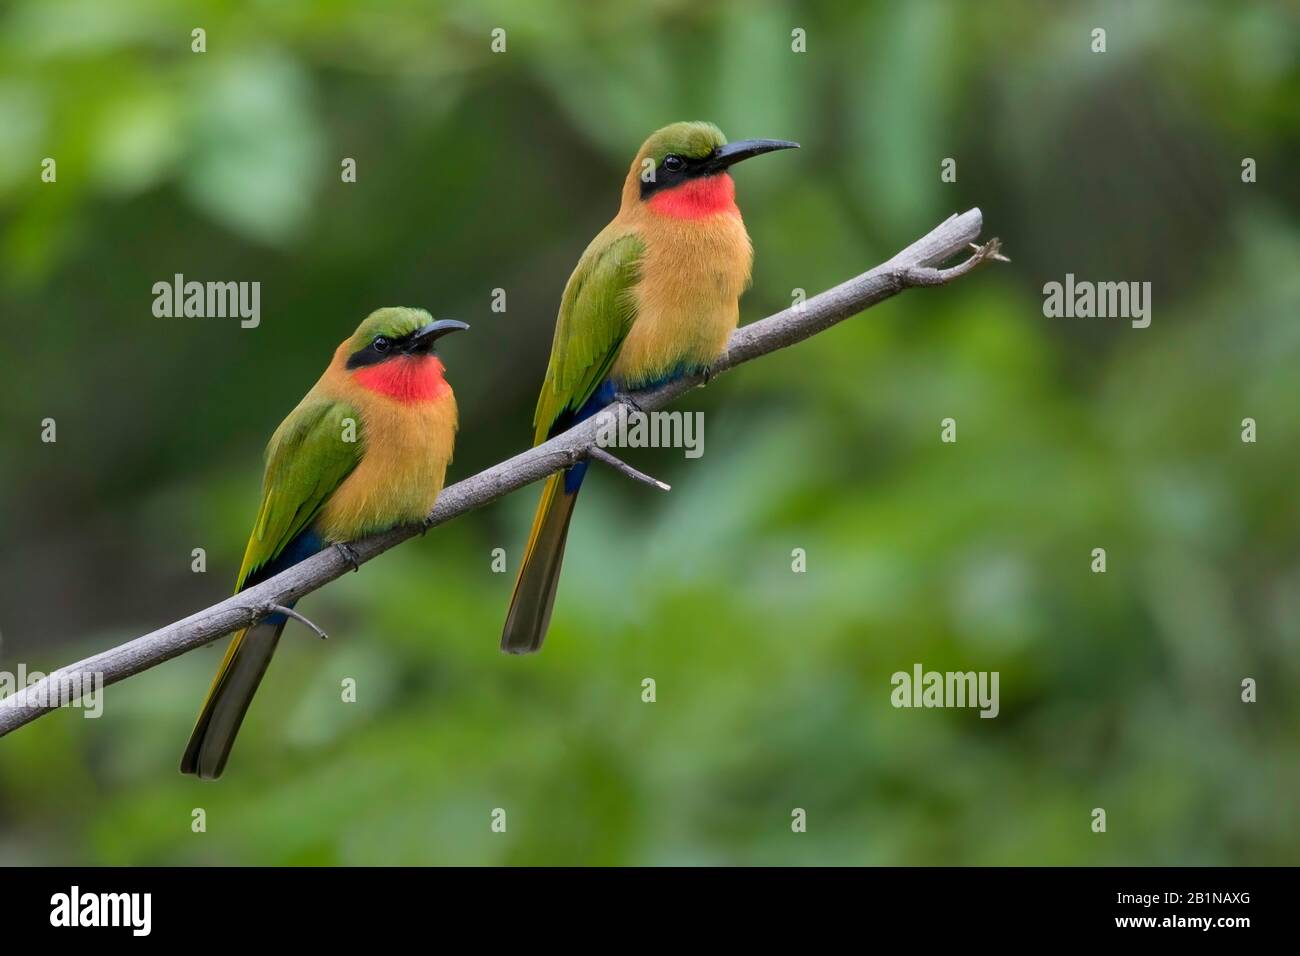 red-throated bee eater (Merops bulocki), perched, Africa Stock Photo